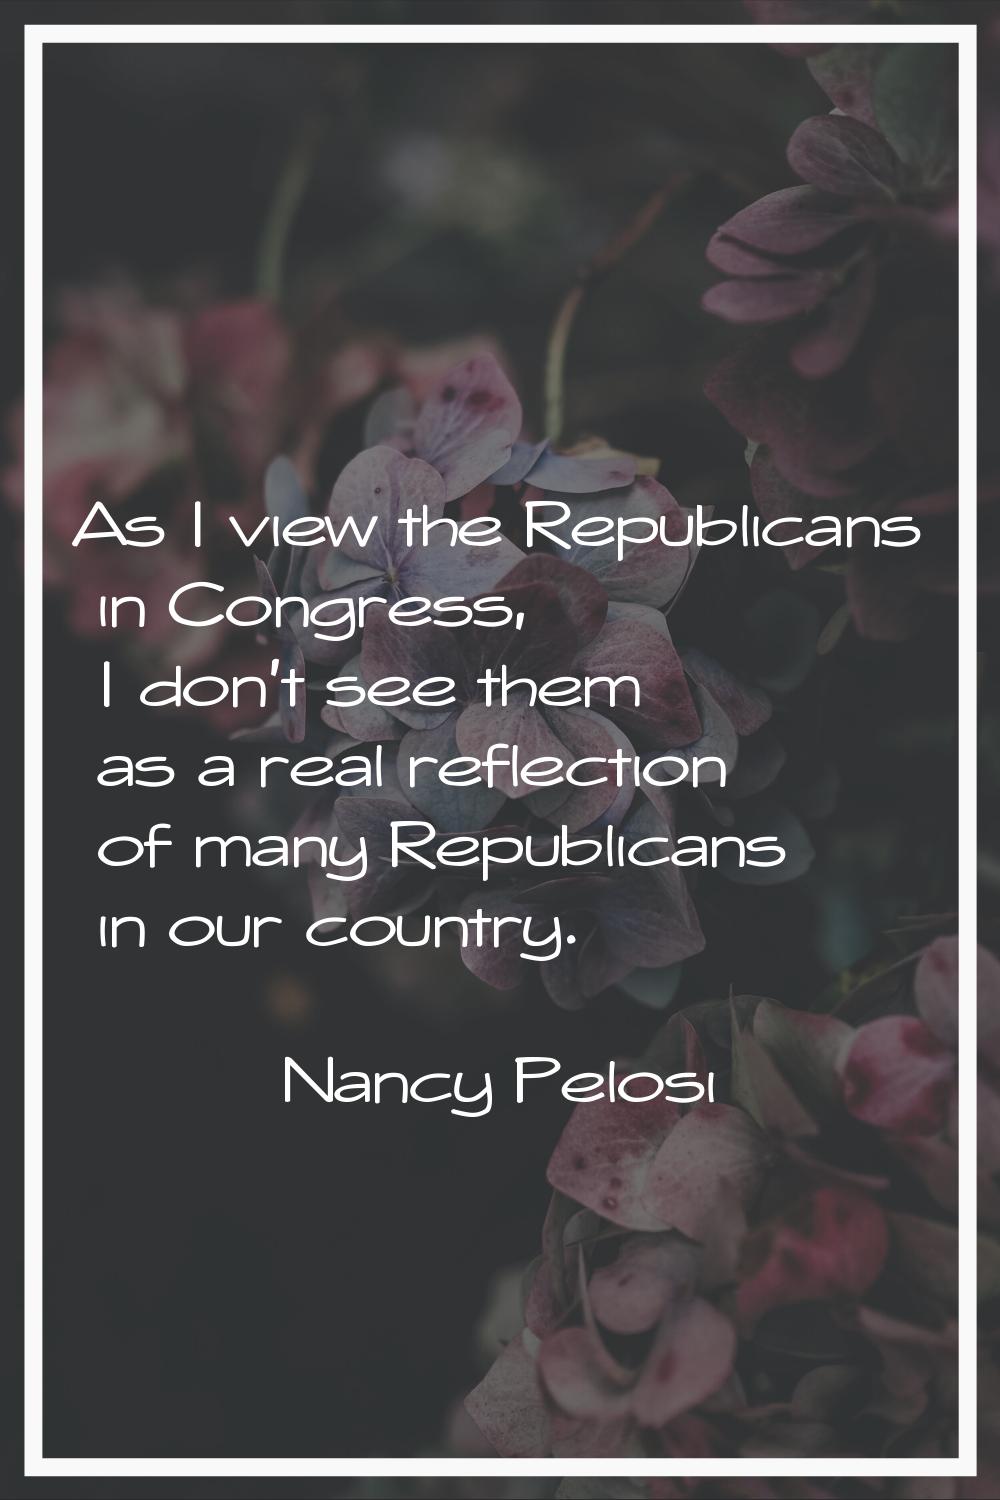 As I view the Republicans in Congress, I don't see them as a real reflection of many Republicans in